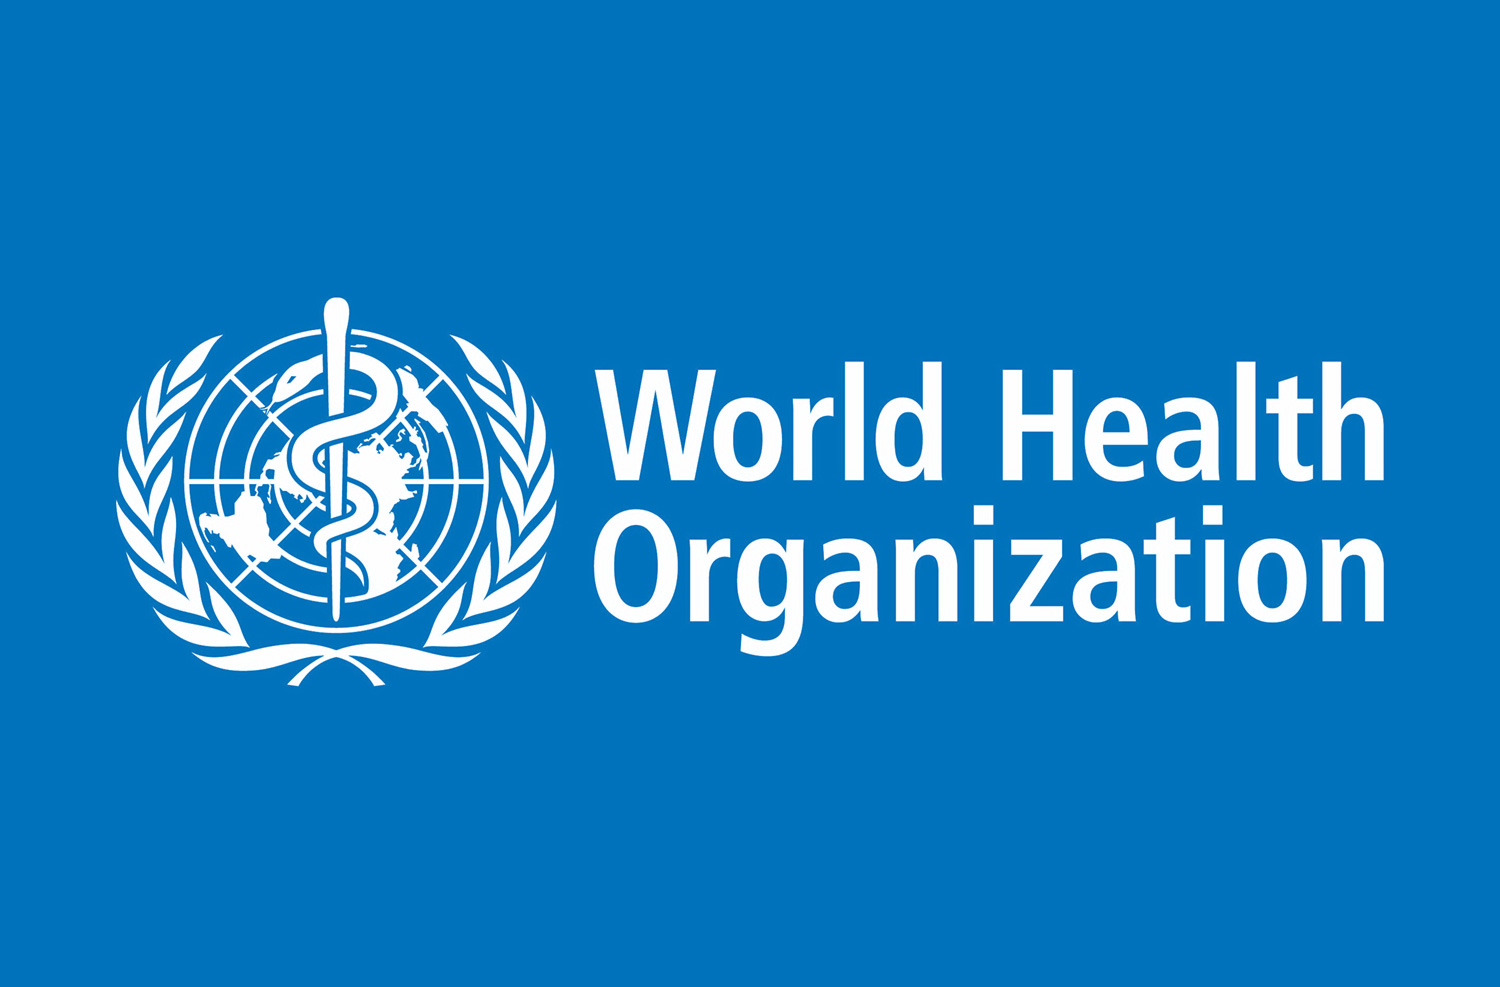 Prioritize Universal Health Coverage; provide quality health services to all: WHO